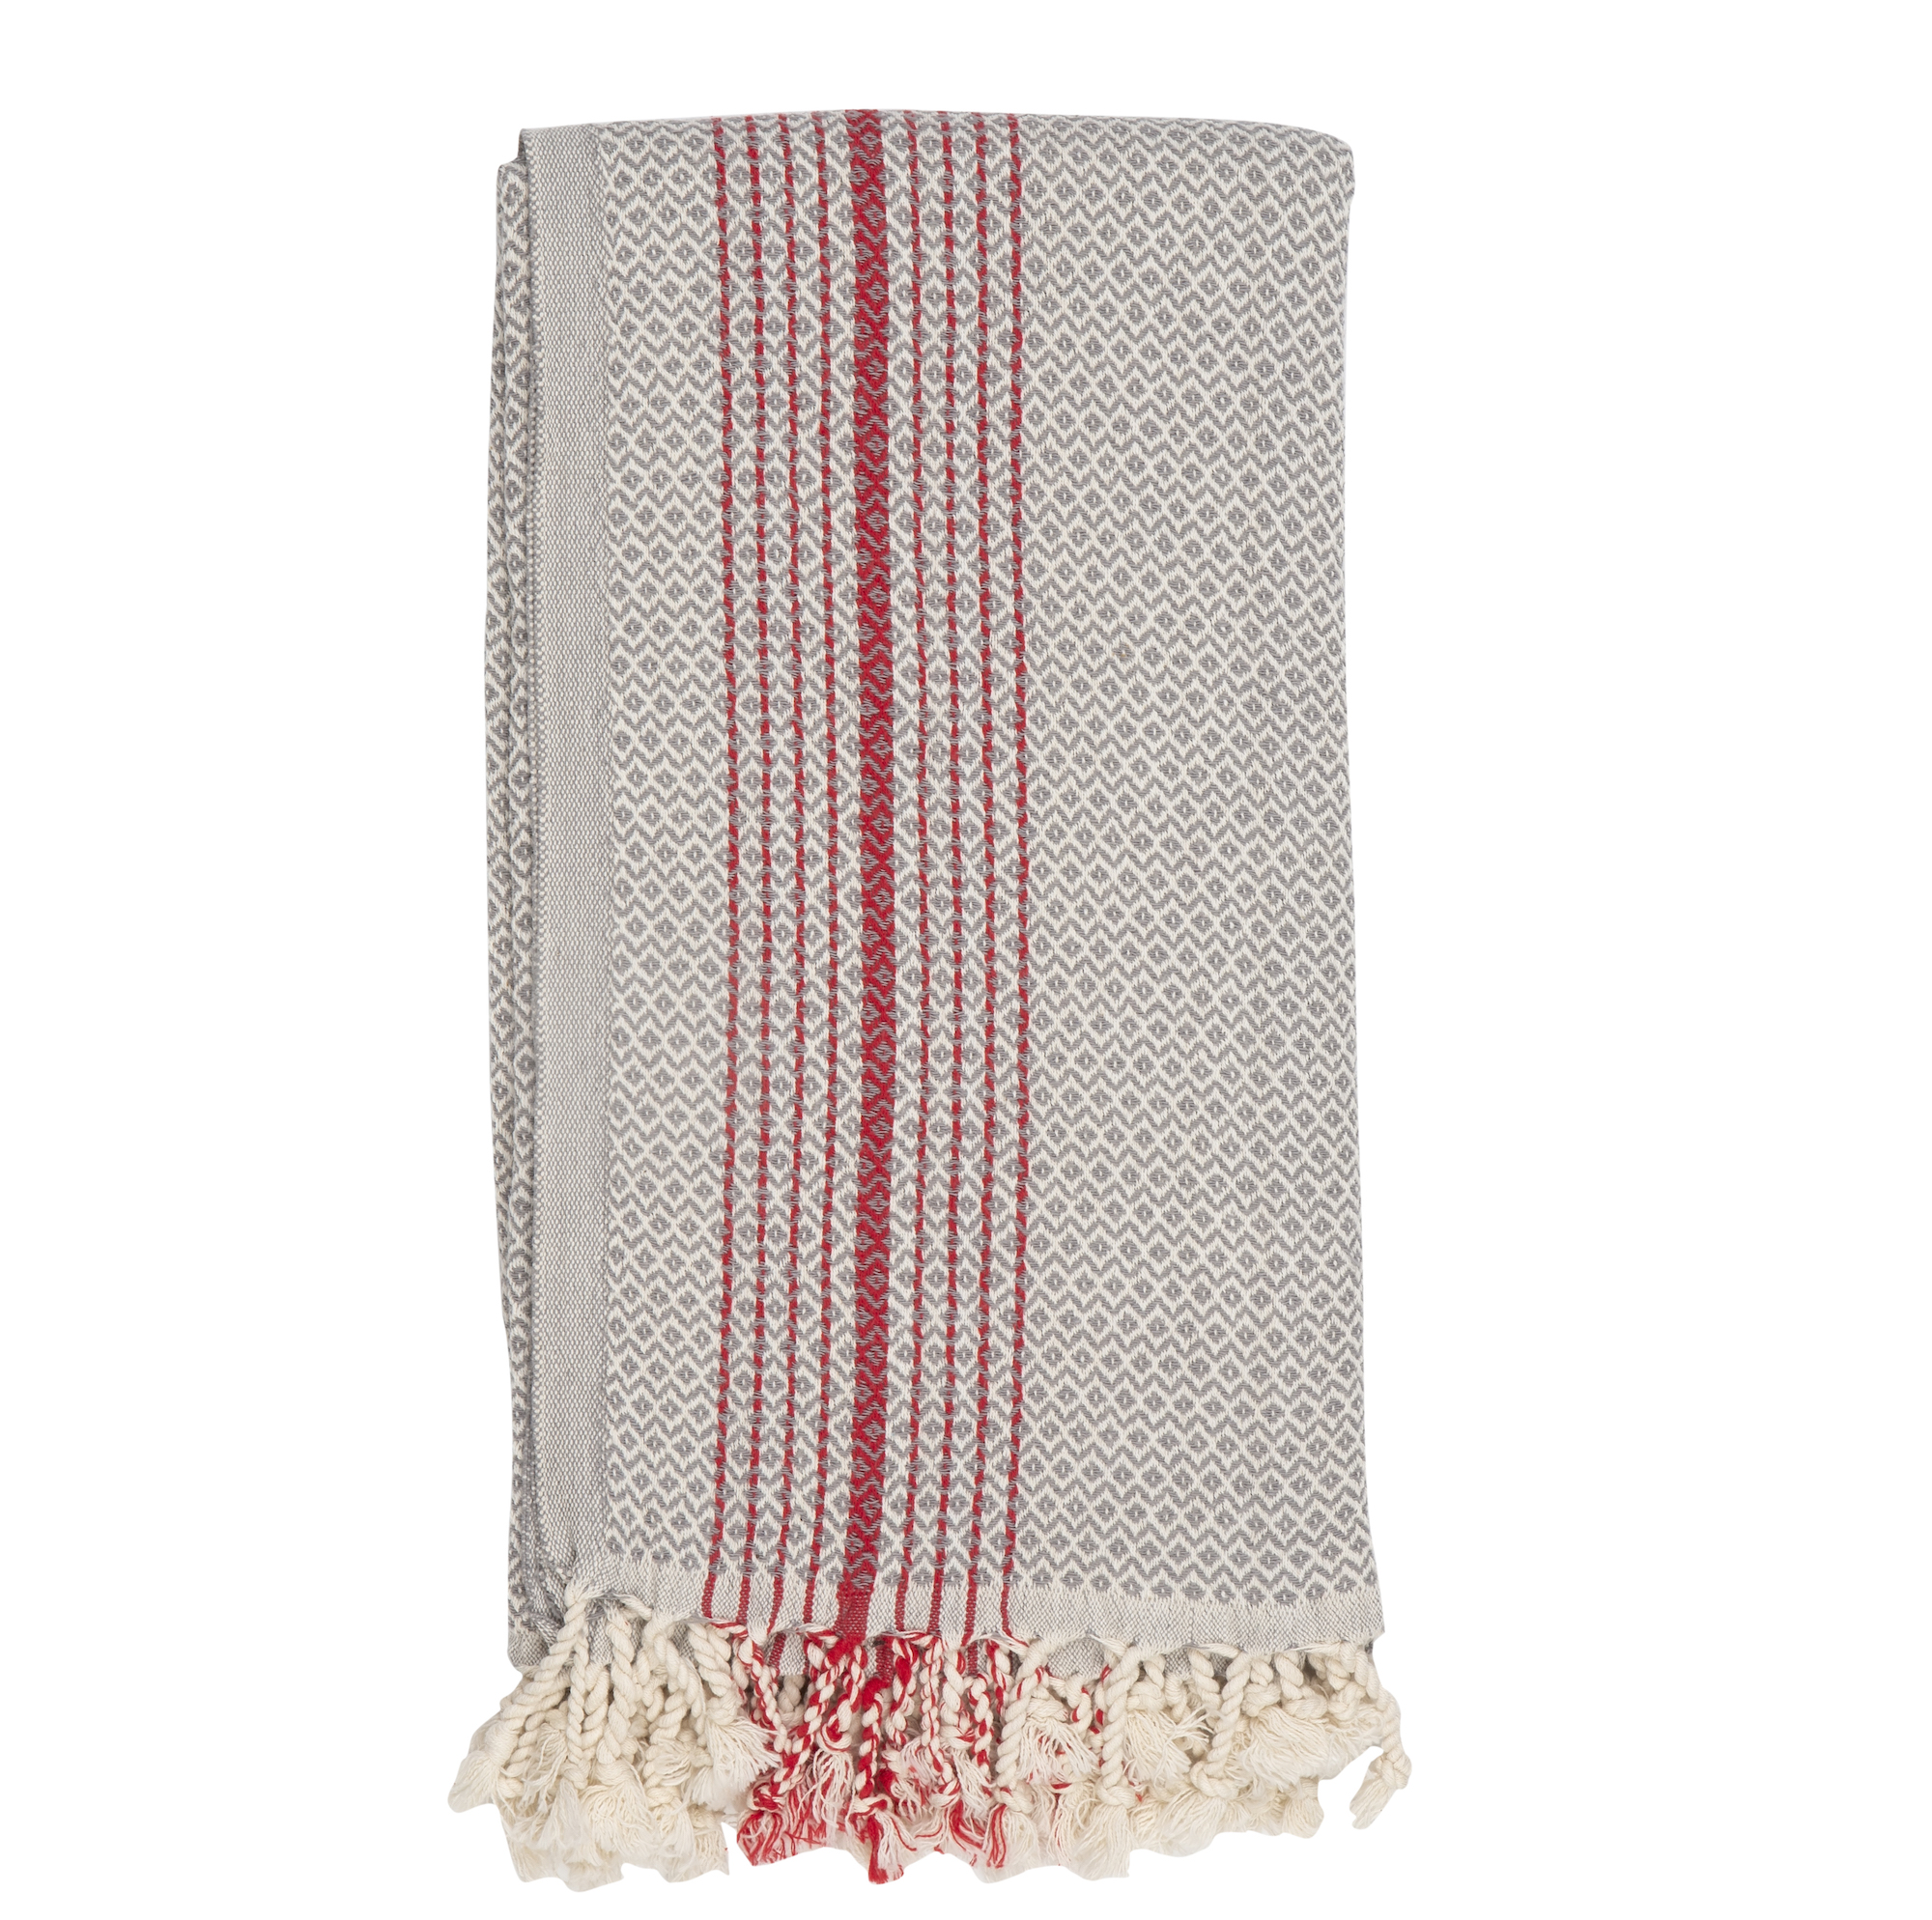 Hammam Towel in Grey with Red Stripes